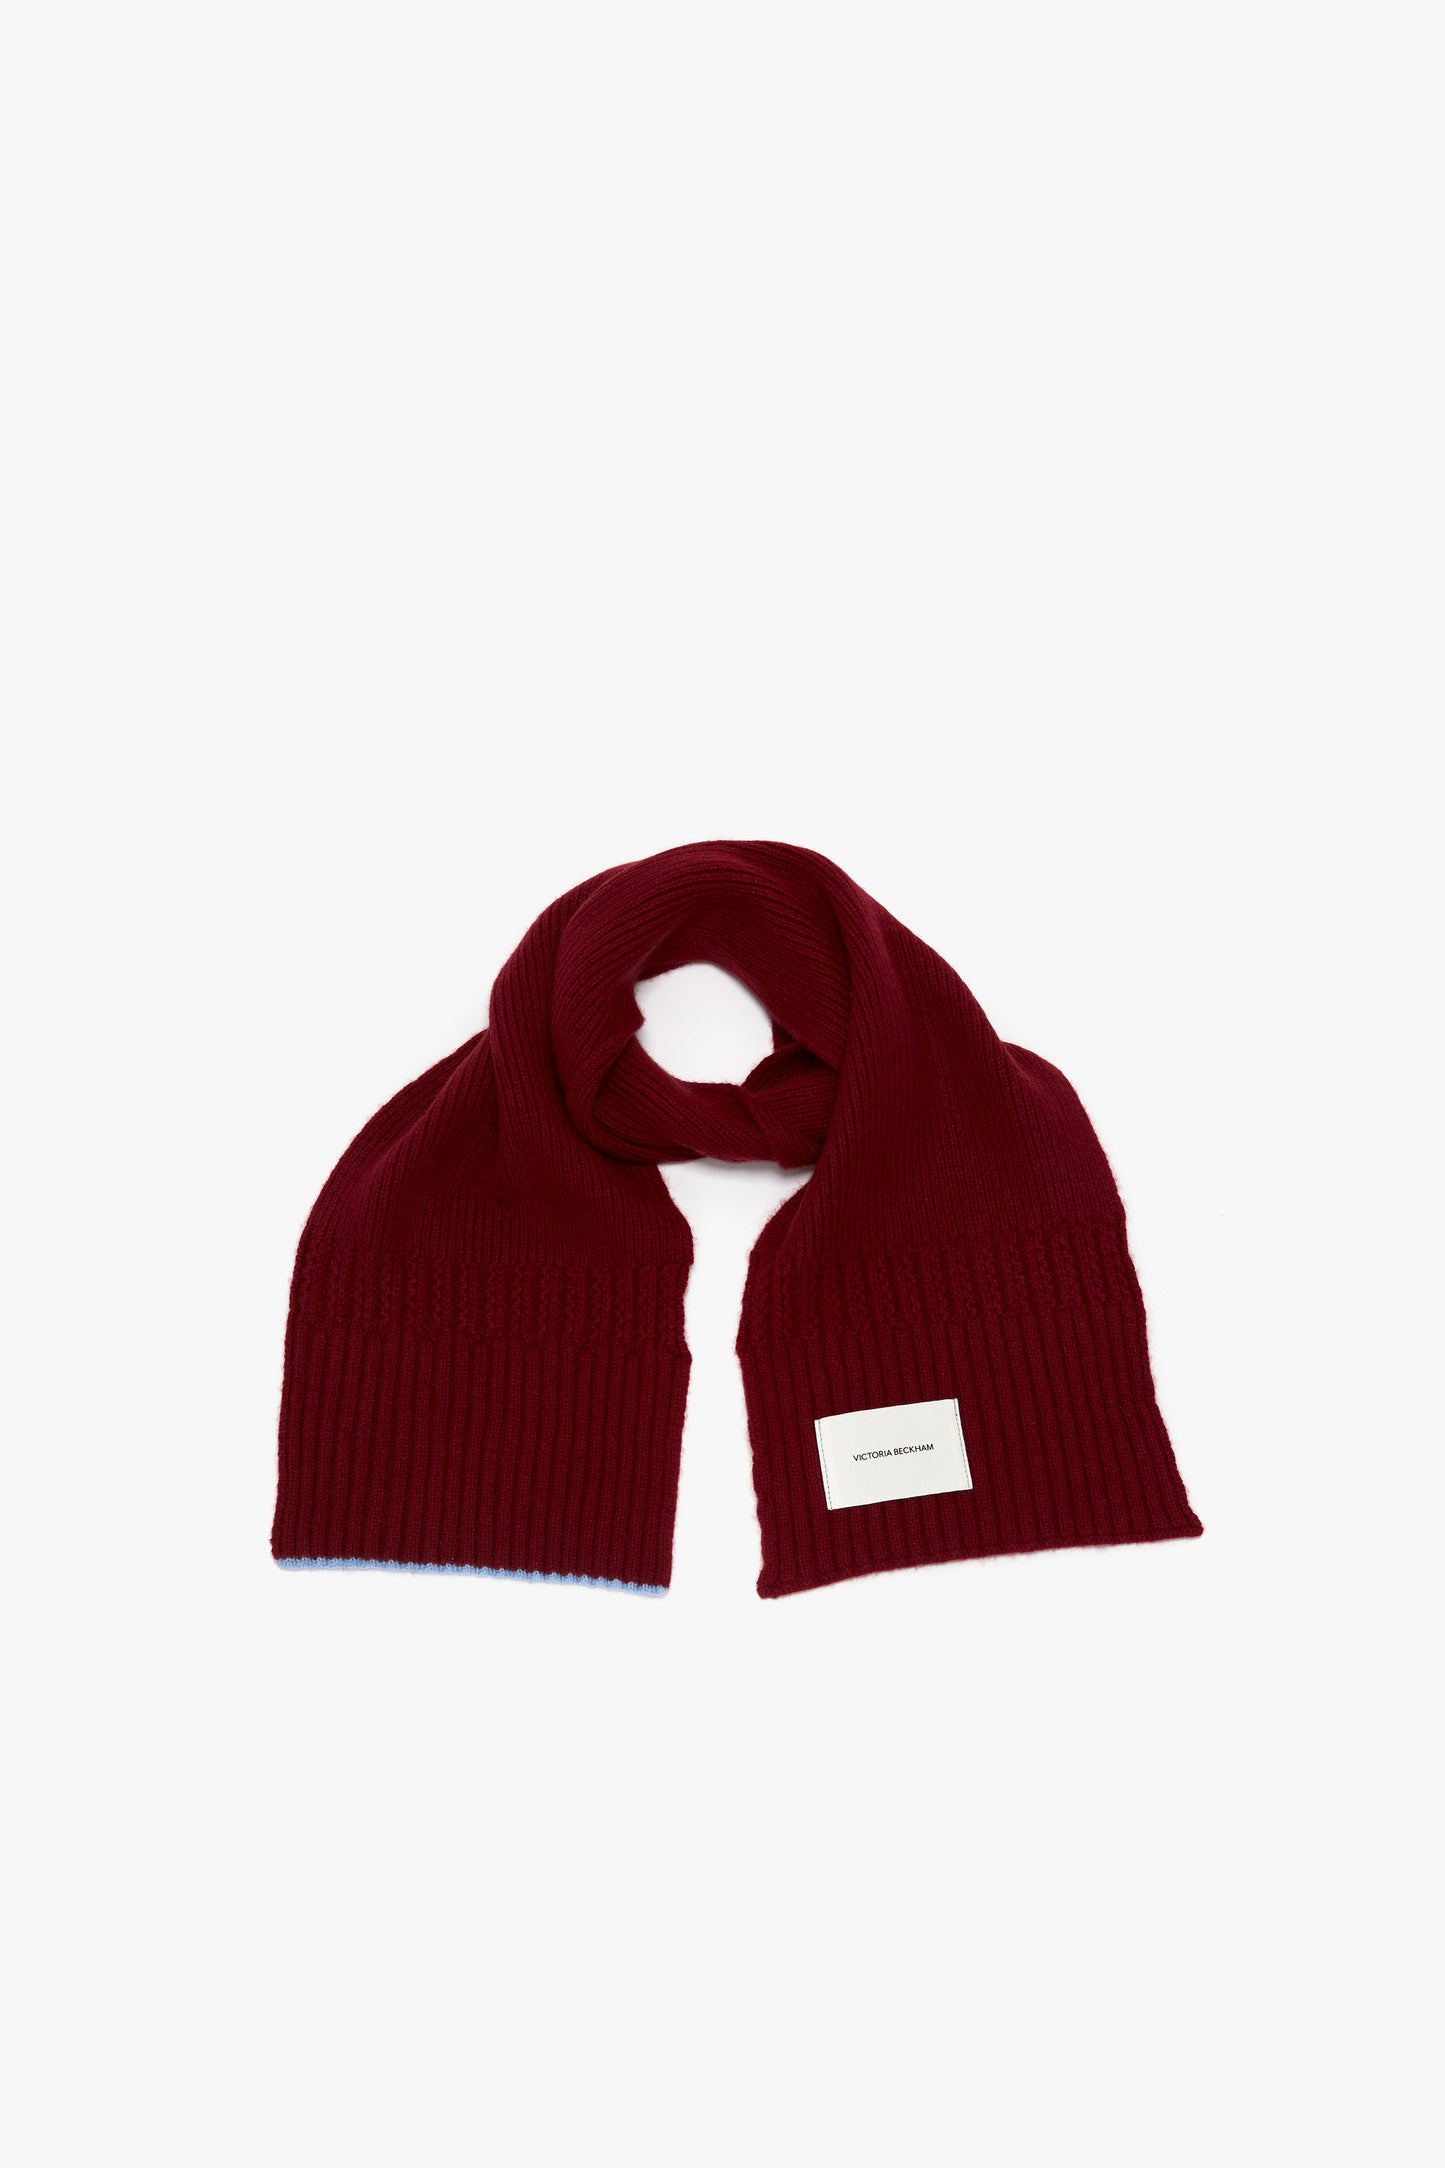 A Victoria Beckham Exclusive Logo Patch Scarf In Burgundy arranged in a loop on a white background, with a visible label.